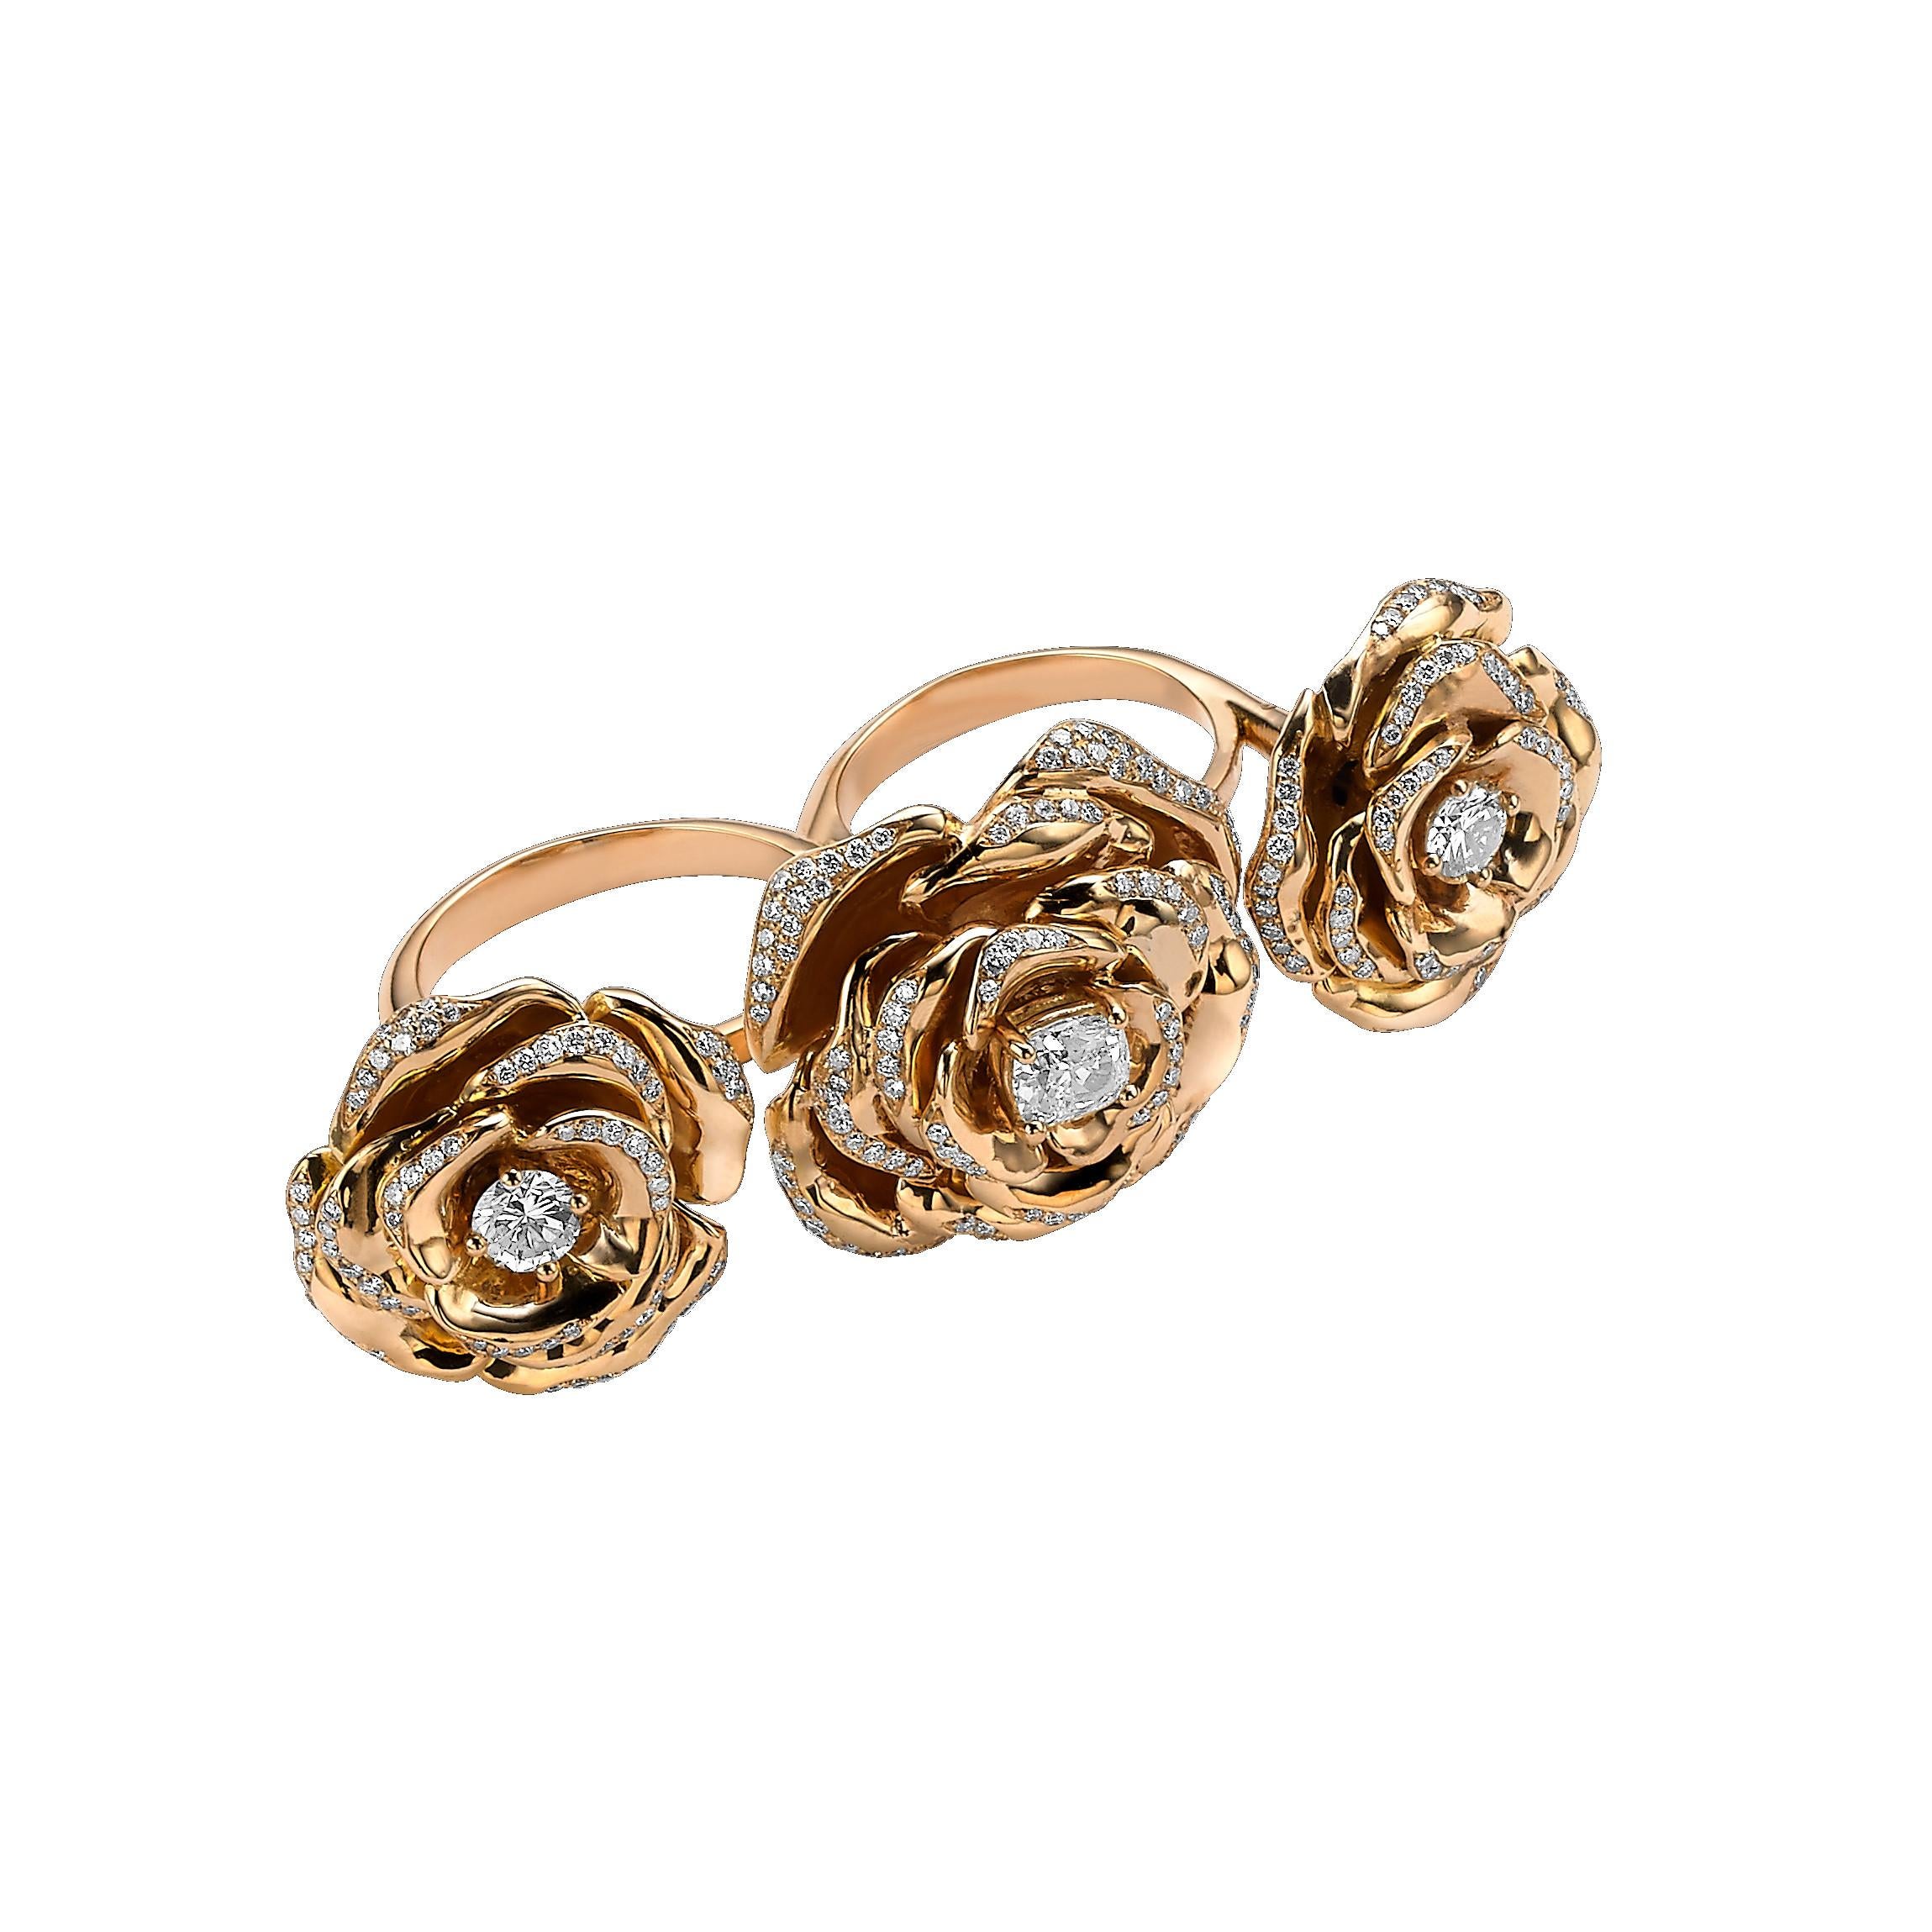 Frohmann 3 Roses 18 Carat Gold with Diamonds on 2 Fingers Ring For Sale